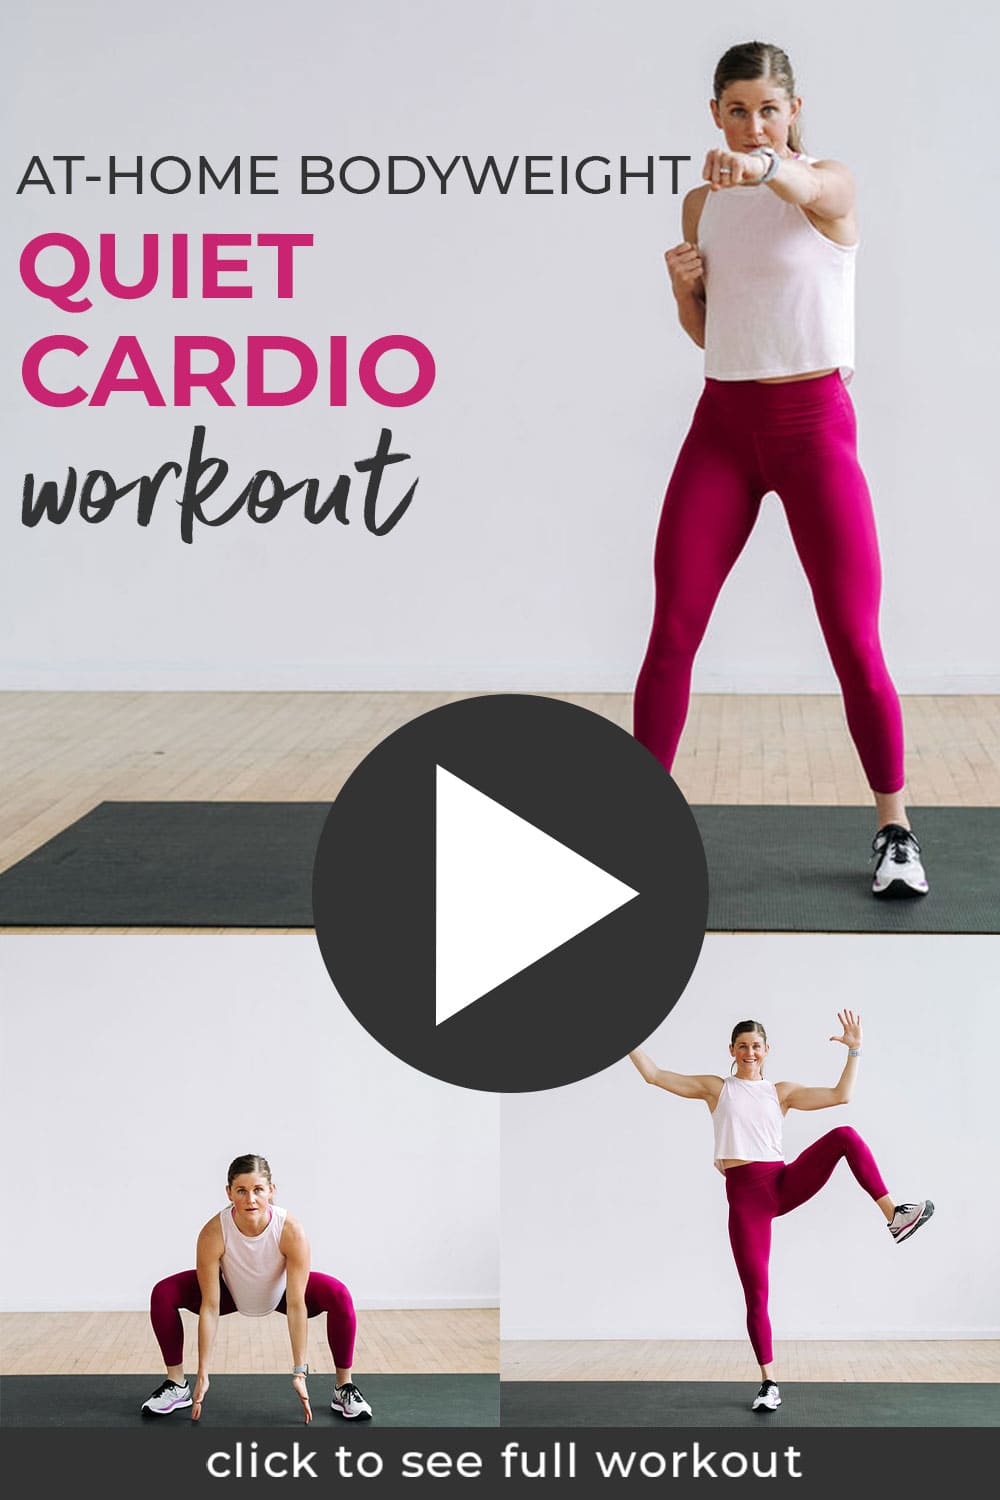 Simple Cardio Workout At Home No Equipment Needed for Push Pull Legs